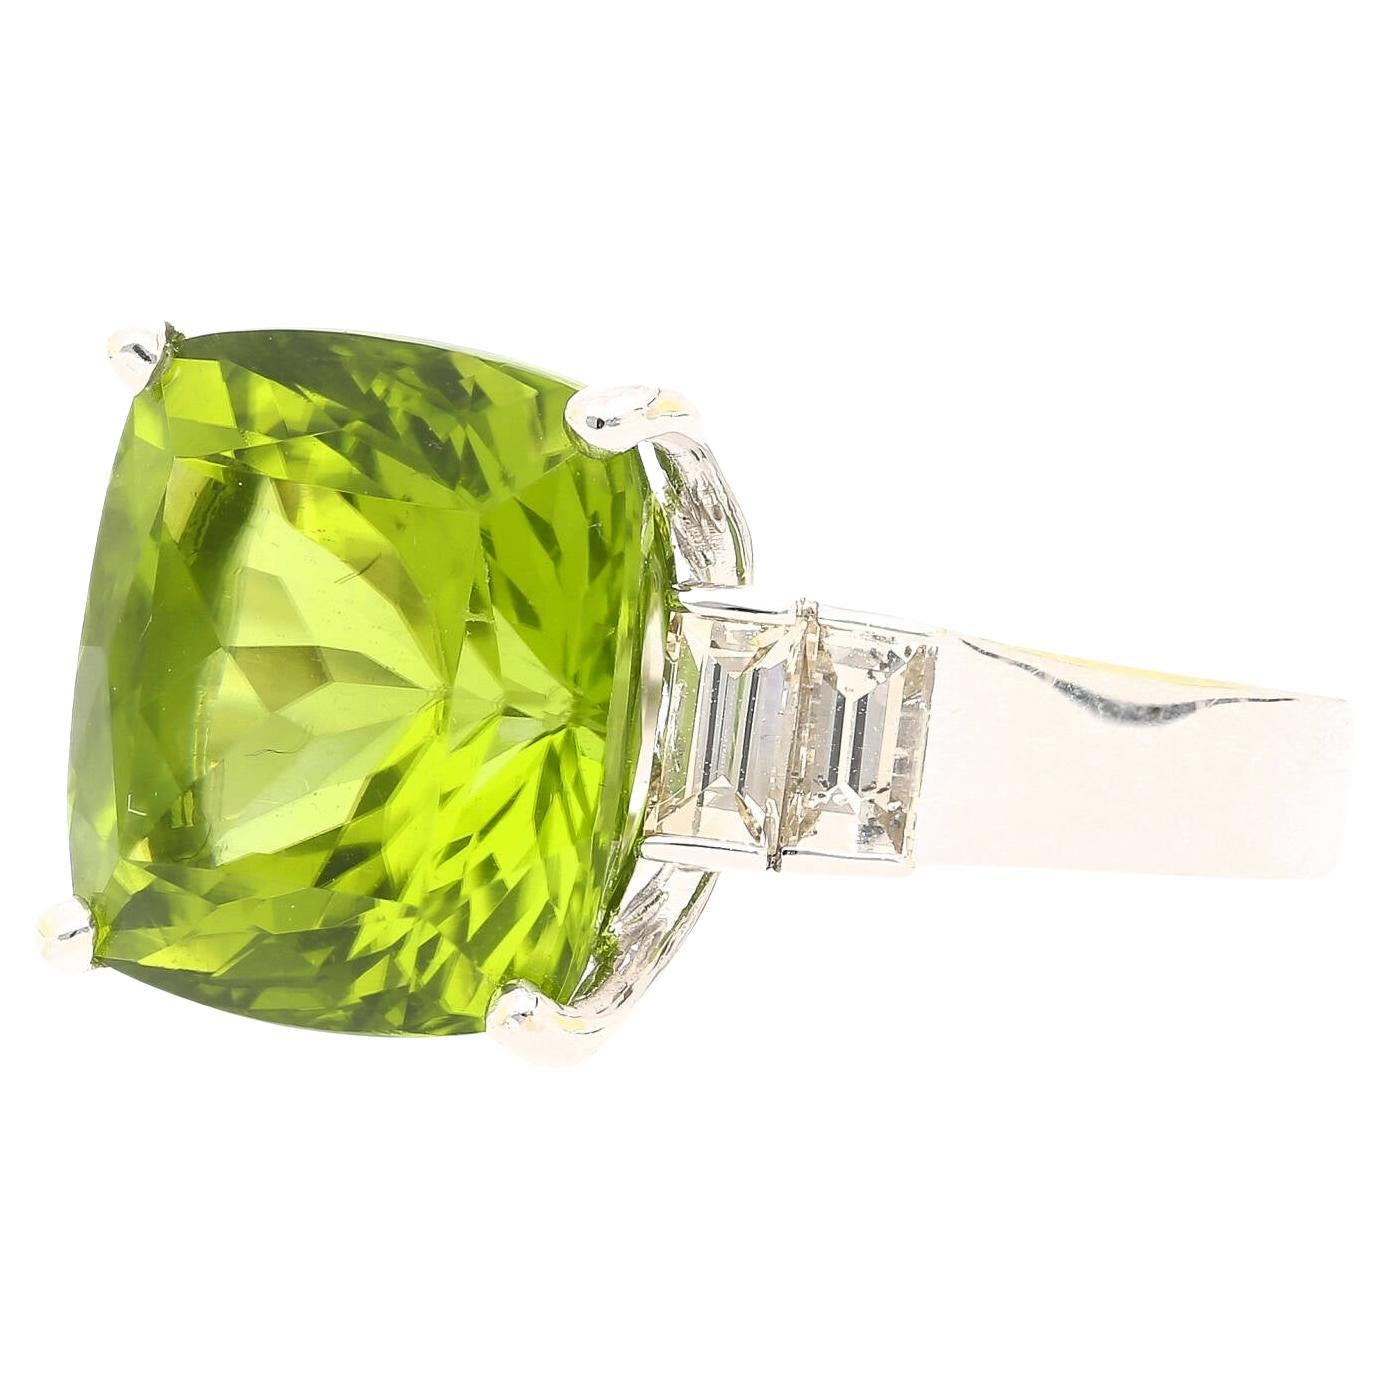 14.11 Carat Cushion Cut Green Peridot and Baguette Cut Diamond Side Stone Ring in 18K White Gold. This sophisticated ring features a peridot center stone with two baguette-cut diamonds on each side. The peridot boasts exceptional brilliance and is